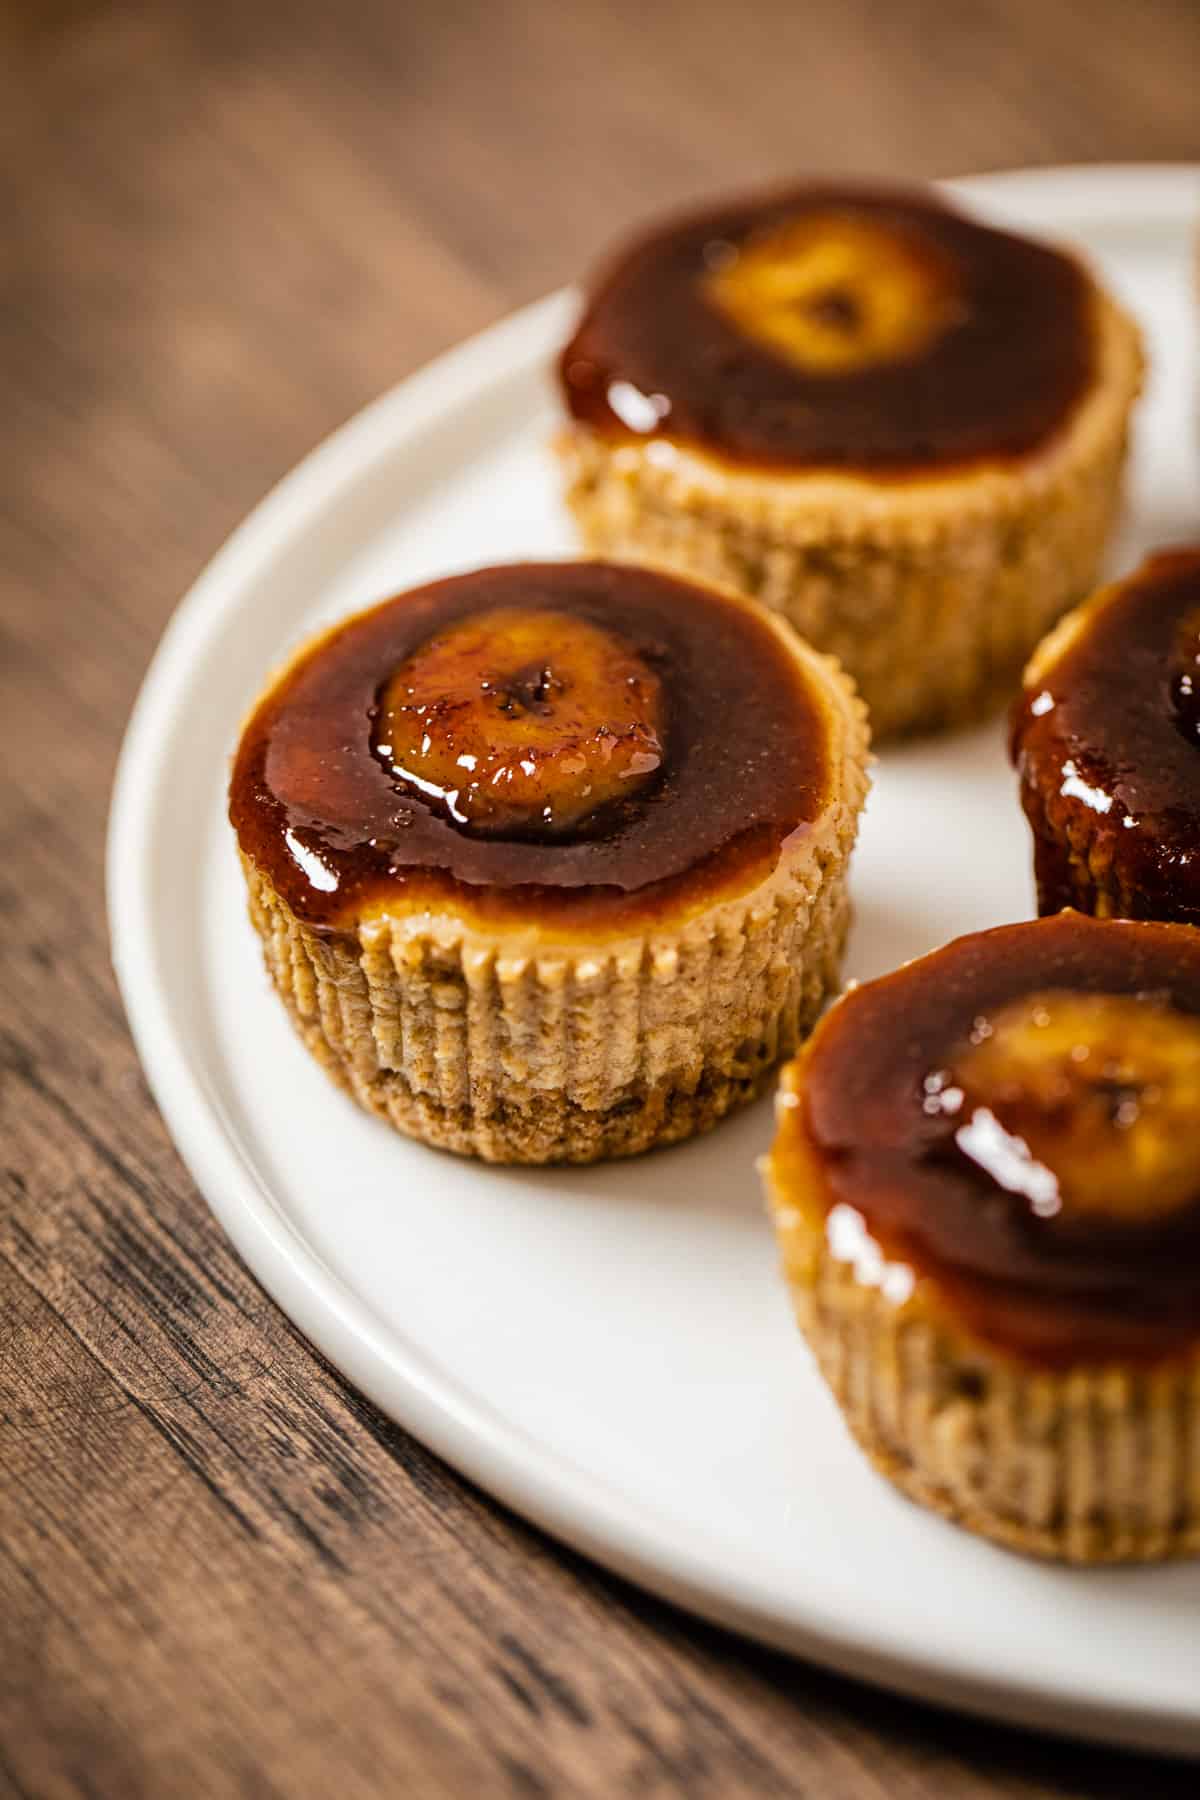 cheesecake cupcakes topped with bananas foster sauce on a white plate